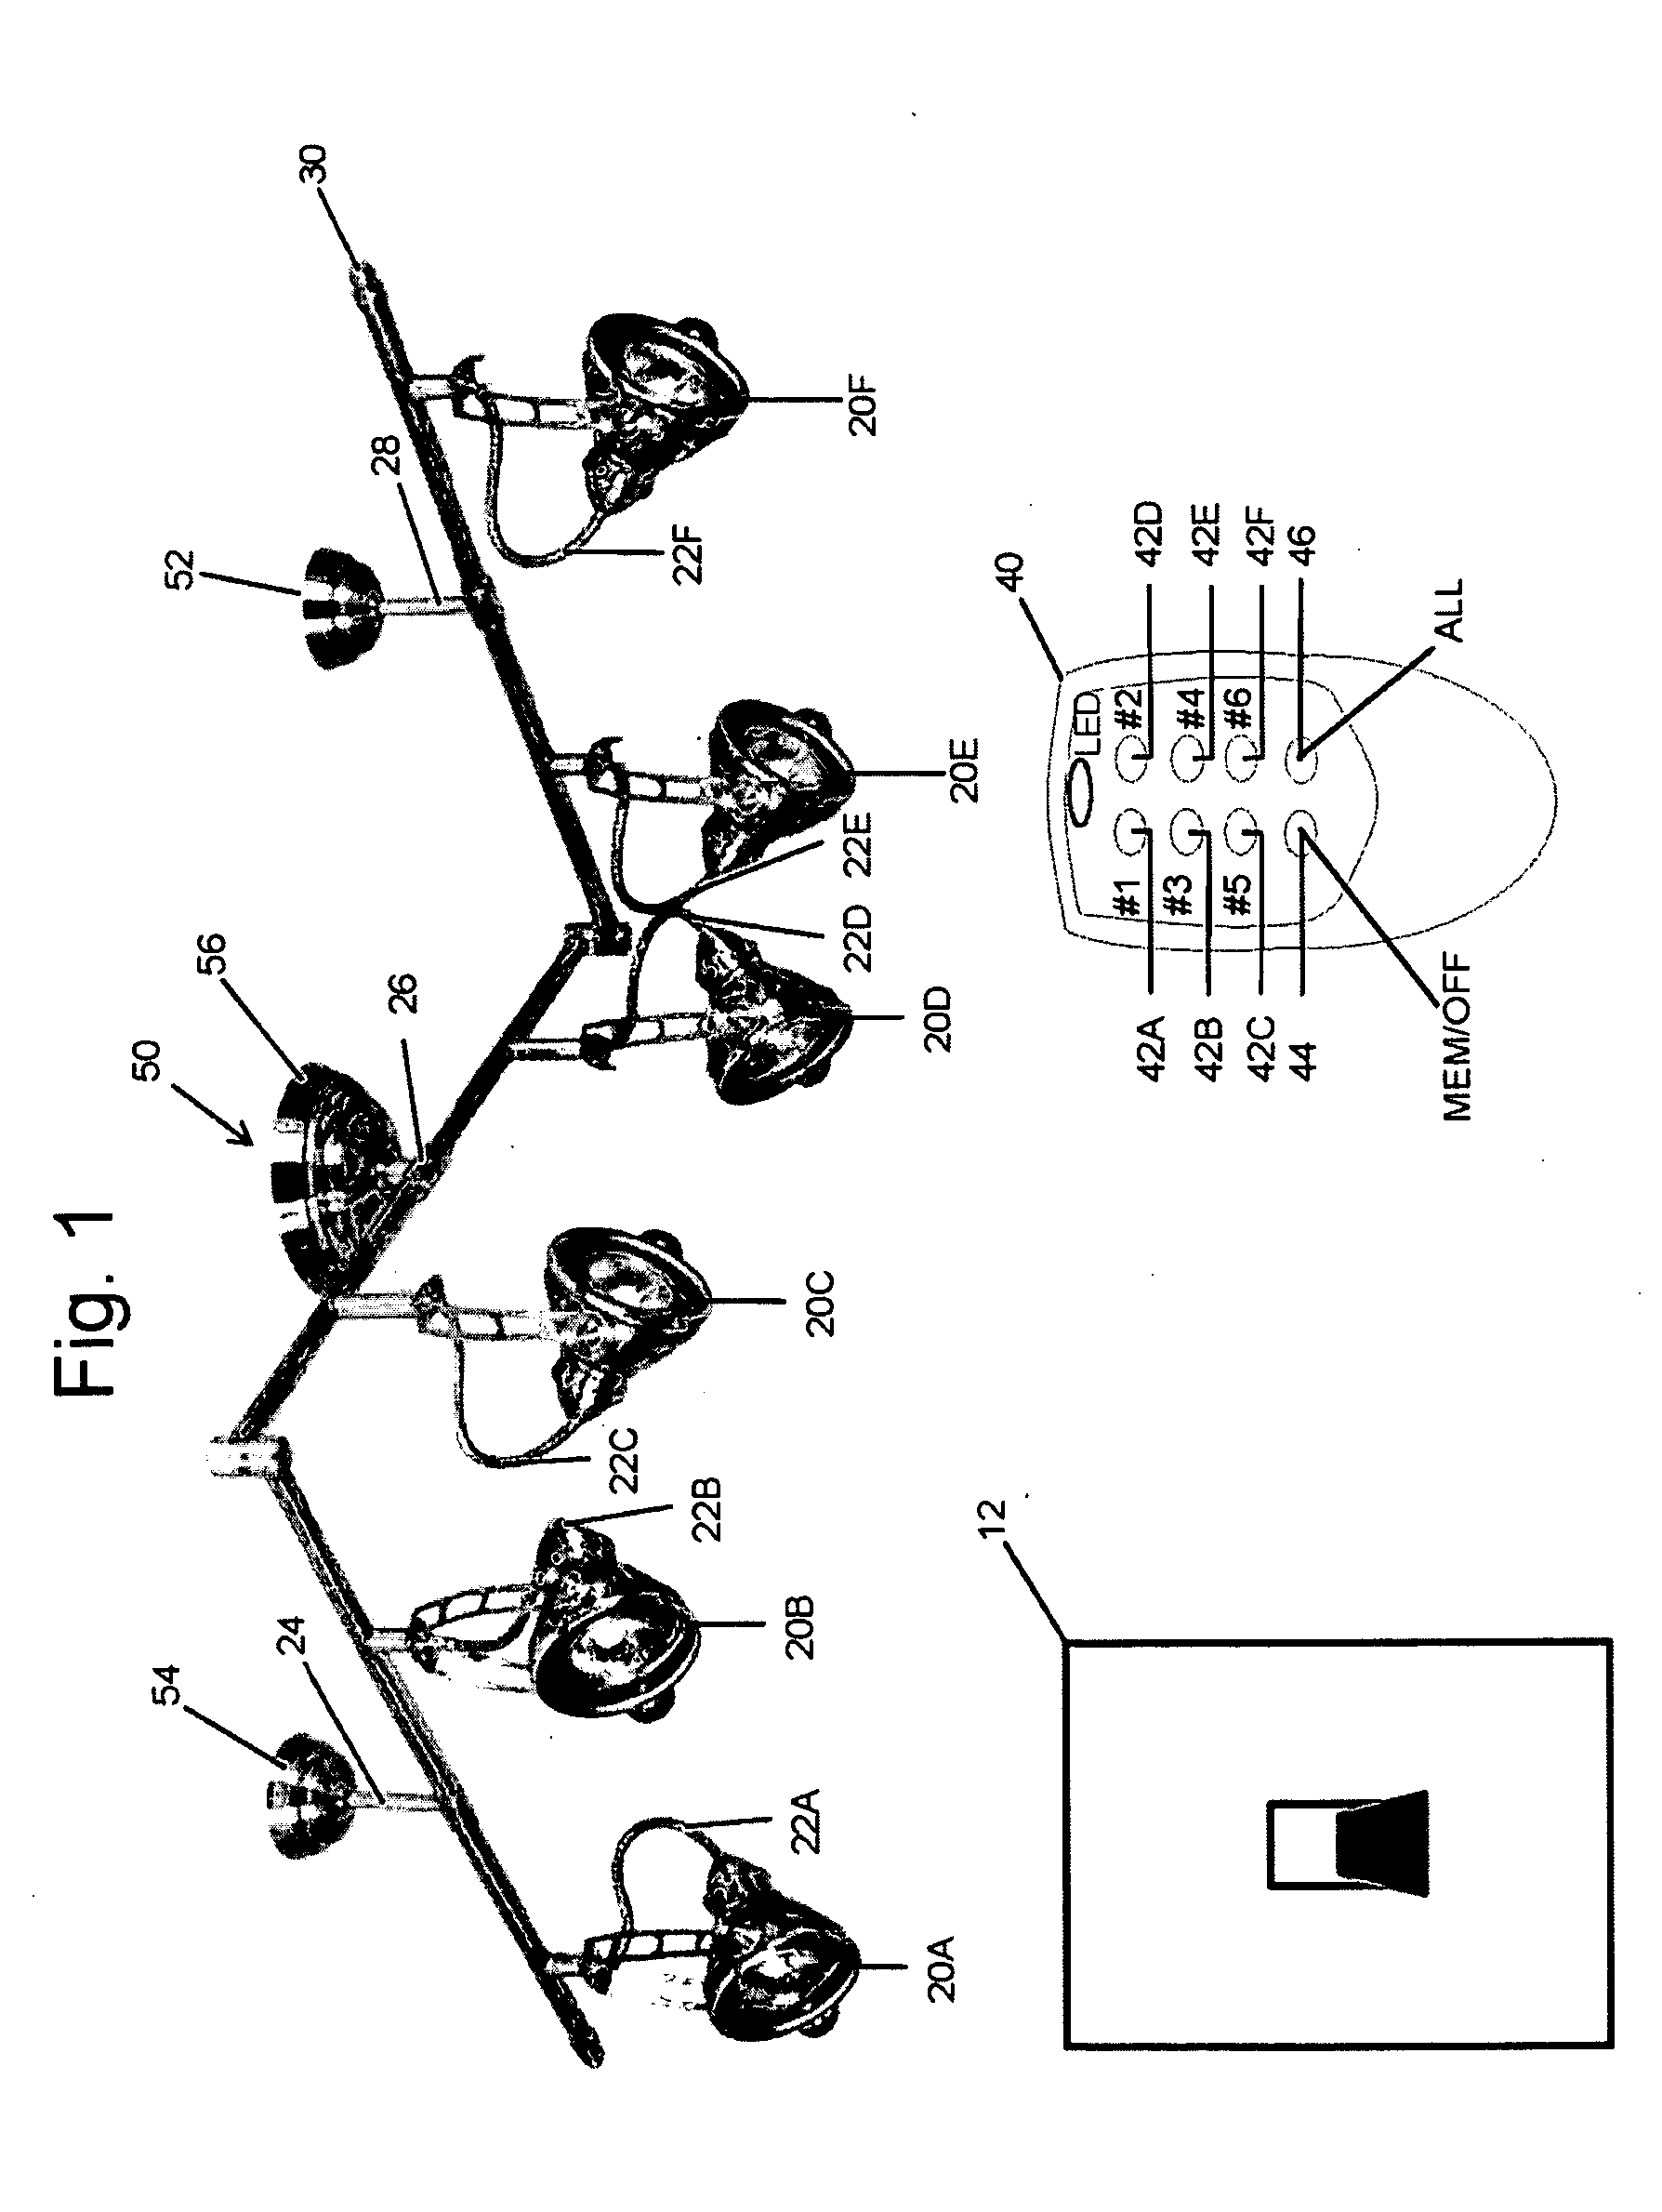 Remotely controllable track lighting system